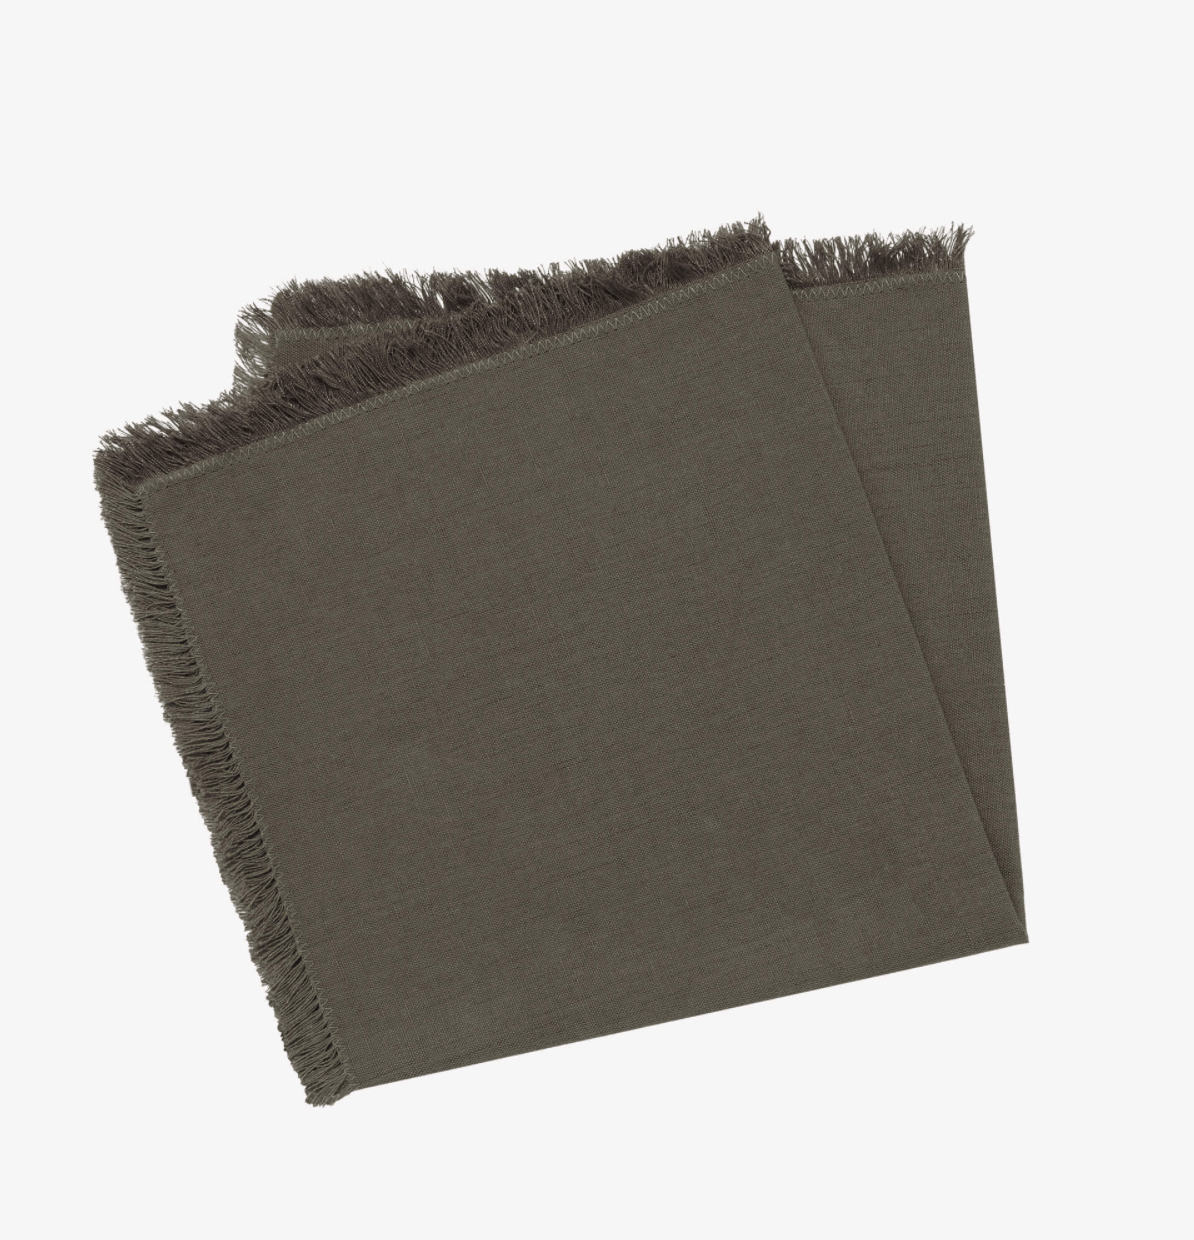 Otto Napkin Set of 4 - Olive House of Dudley